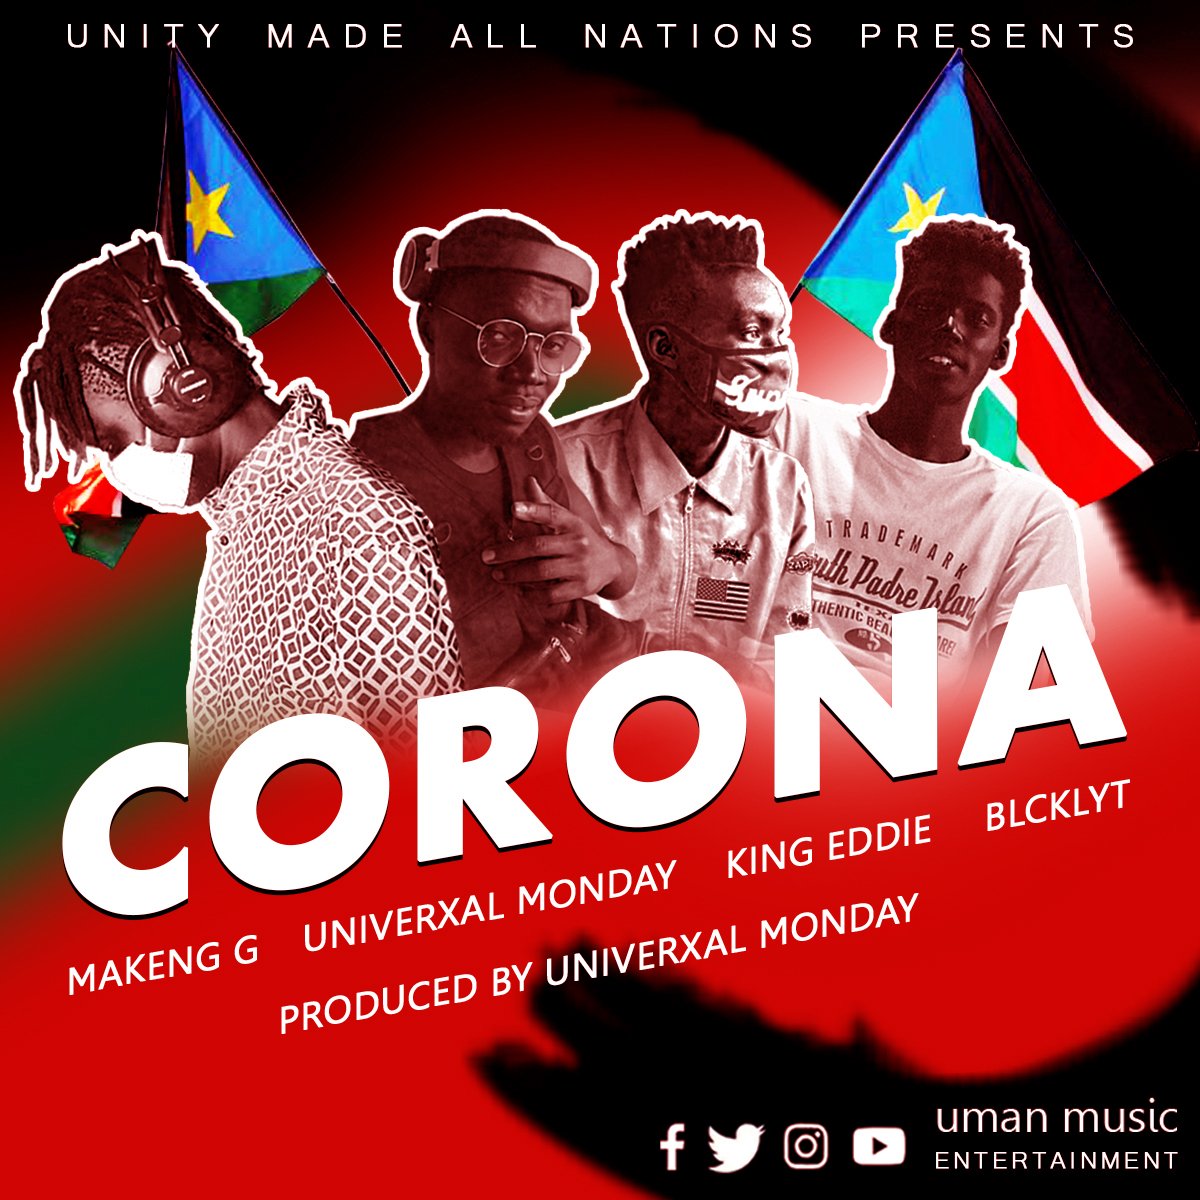 #TogetherWeFightCorona
We need to be much more aware about the problems we face and unite to solve them.Corona is real and we all have to join hands and fight it together.
UMAN Ent presents Corona ft Makeng G, Universal Monday, King Eddie, Blcklyt.
youtu.be/O8elqdnhGz8